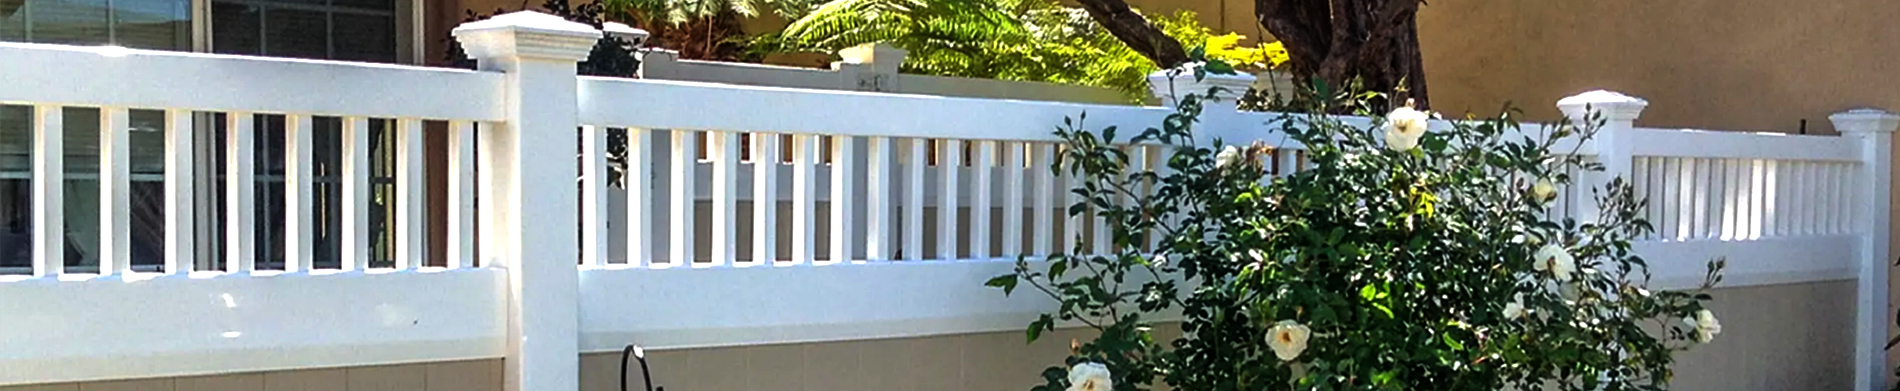 What Makes Duramax Vinyl Fences an Ideal Weatherproof Fence?